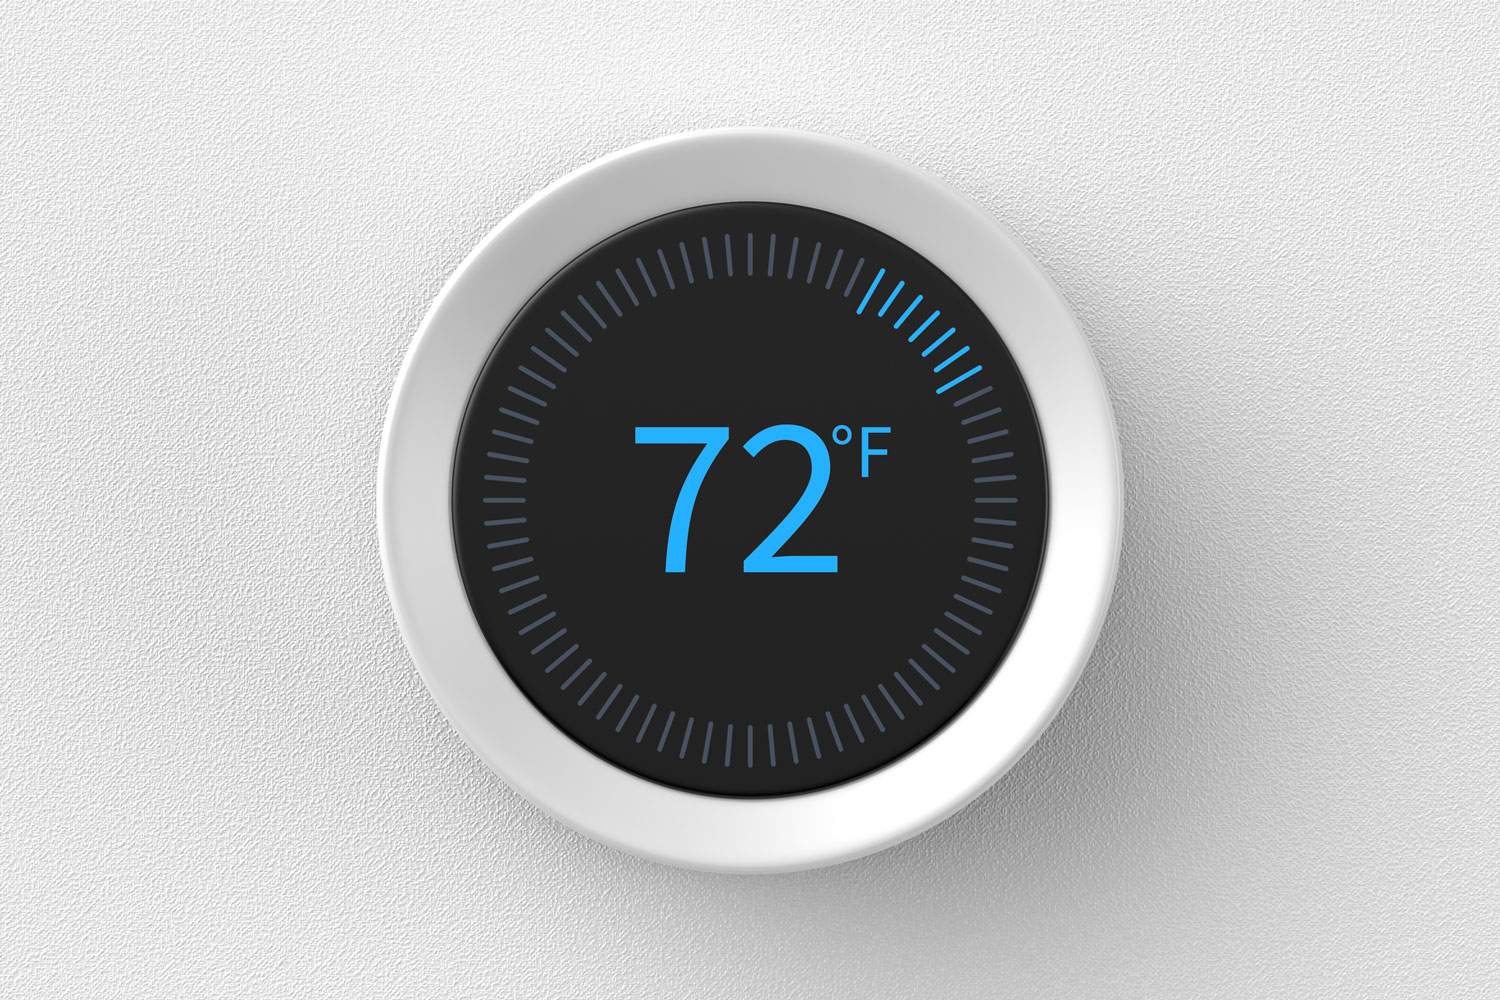 A thermostat set to 72 degrees